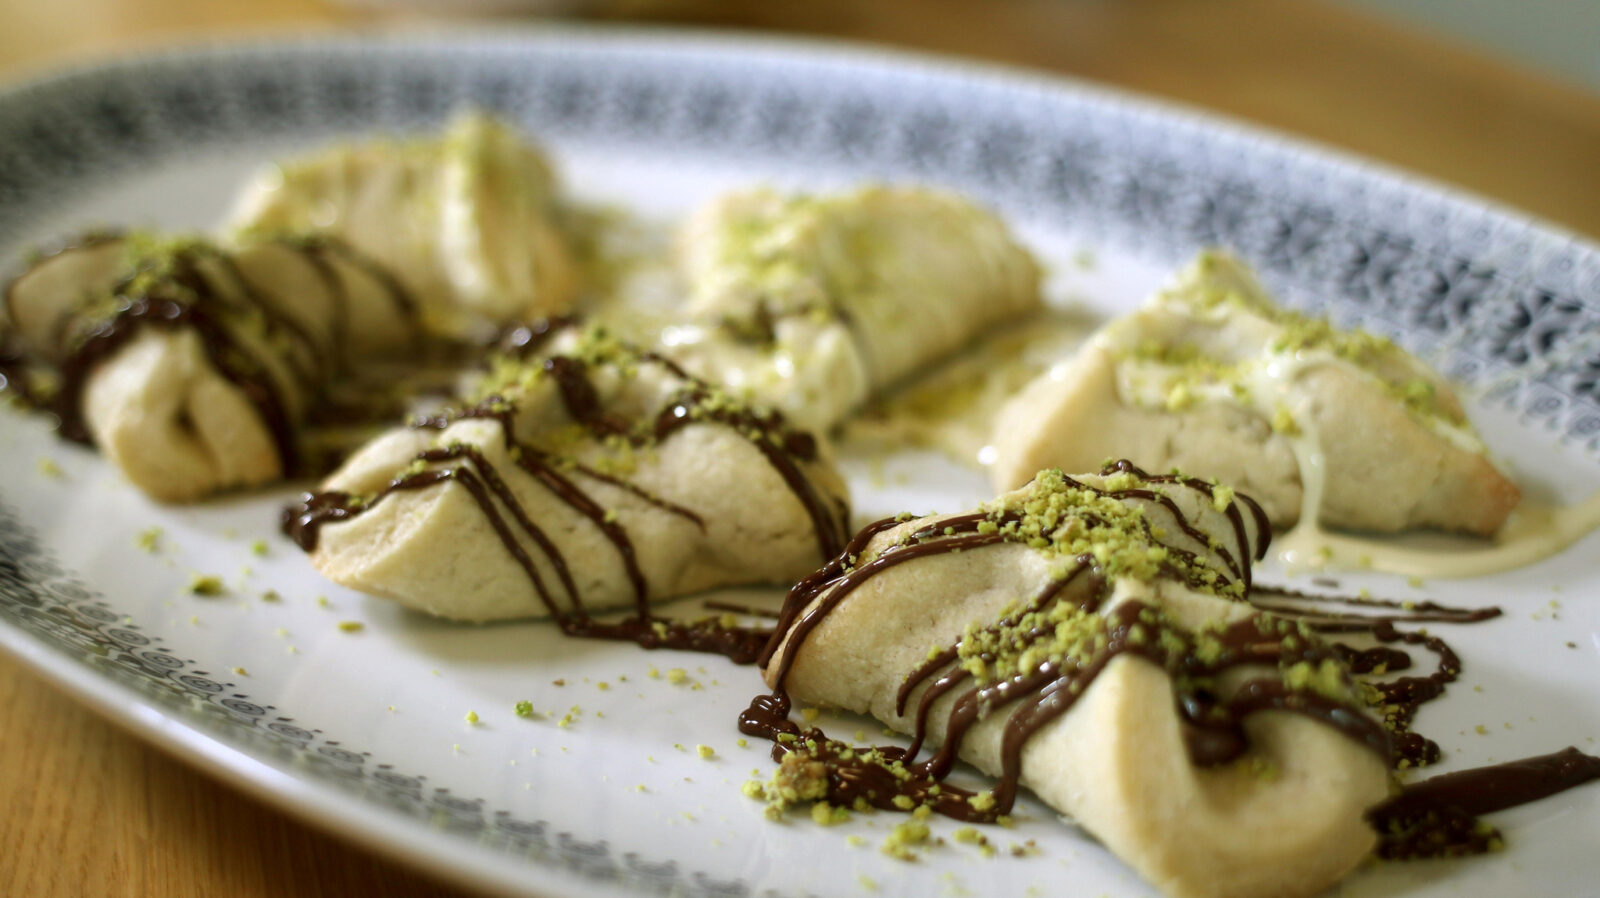 Anyone for a Nutella-filled hamantaschen? Photo by Haim Silberstein